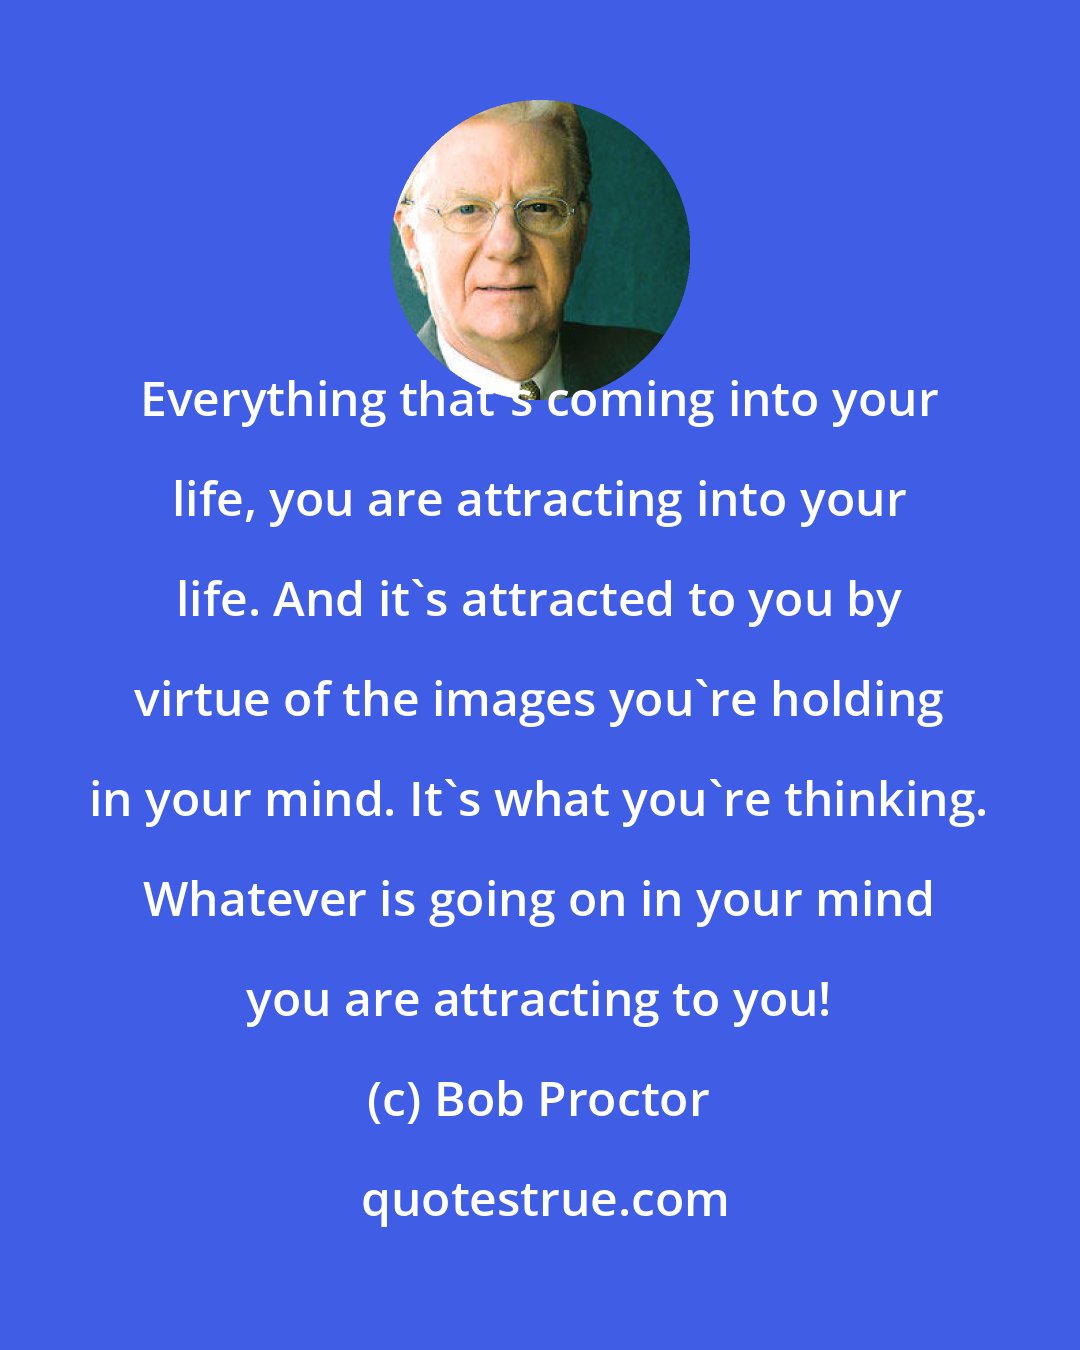 Bob Proctor: Everything that's coming into your life, you are attracting into your life. And it's attracted to you by virtue of the images you're holding in your mind. It's what you're thinking. Whatever is going on in your mind you are attracting to you!